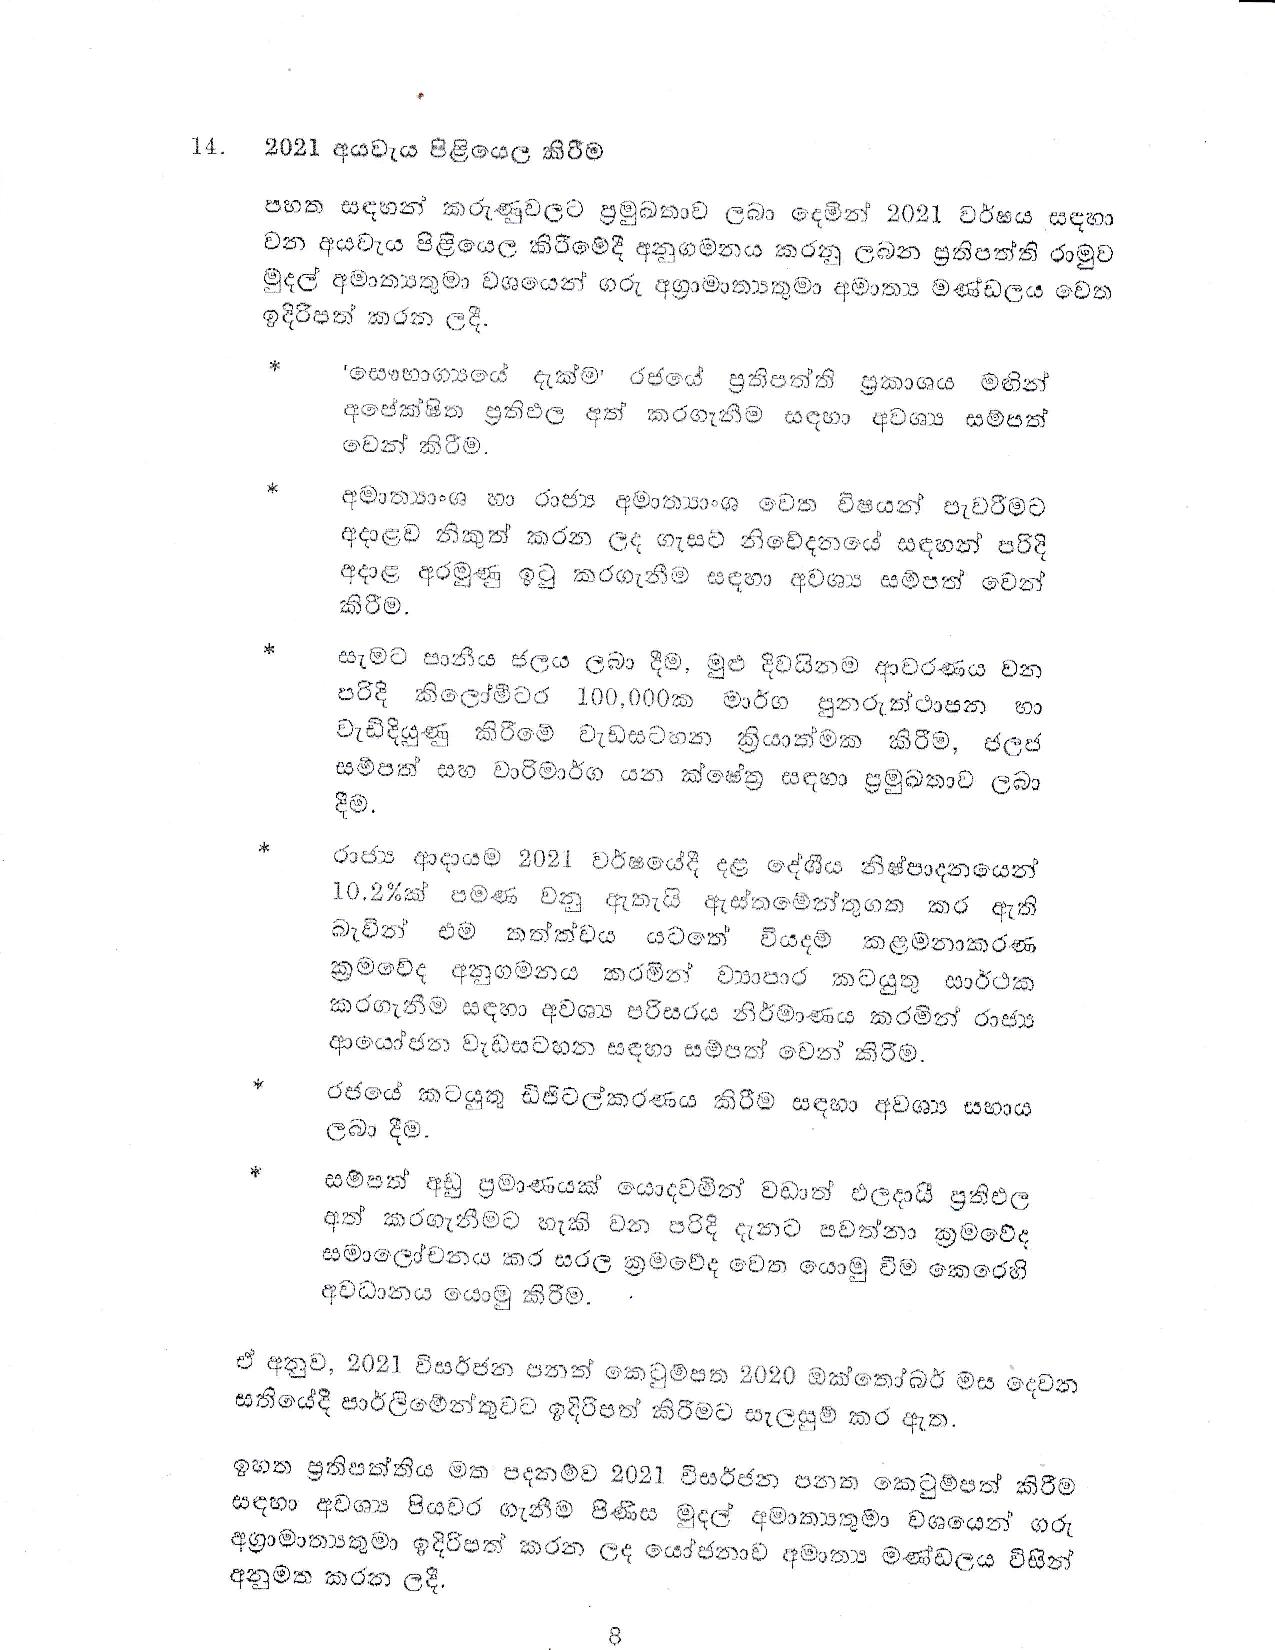 Cabinet Decision on 16.09.2020 page 008